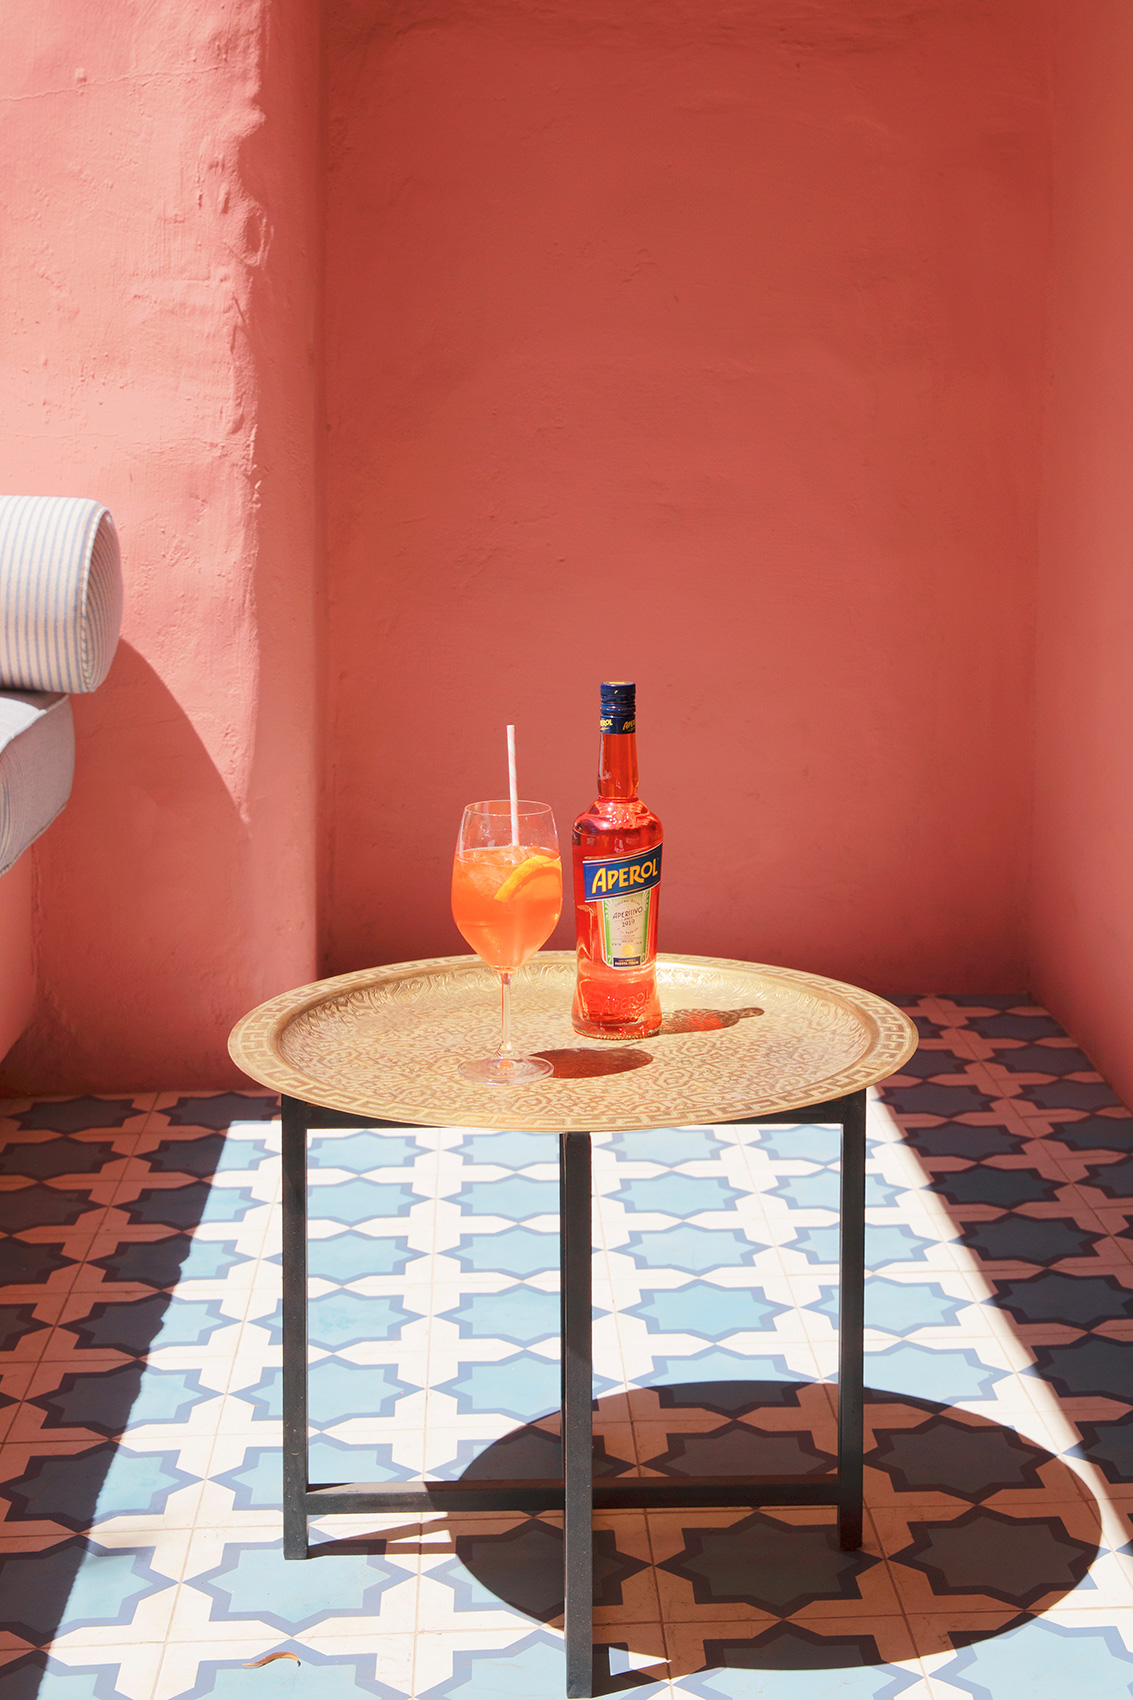 An Aperol Spritz on a sunny day. Kimberly Genevieve lifestyle photographer Los Angeles